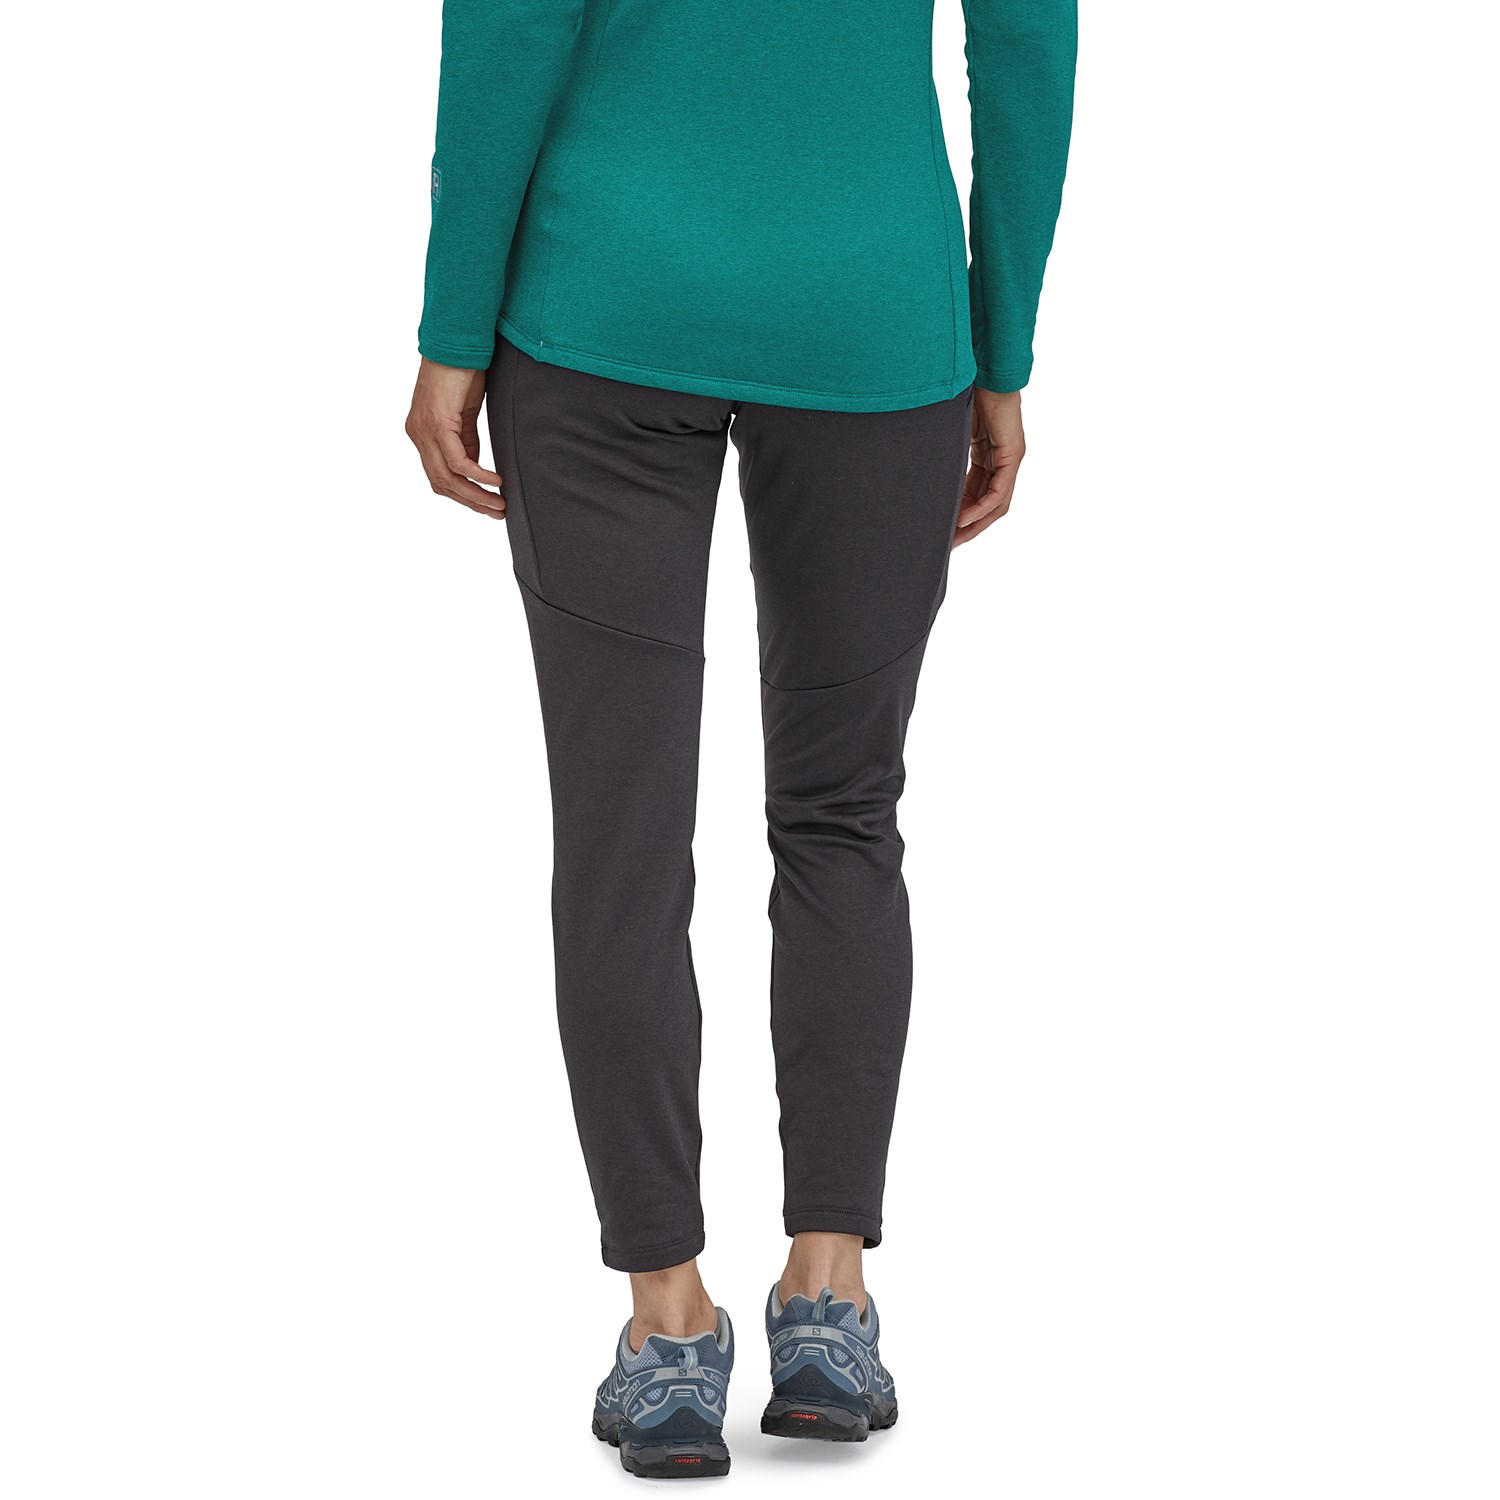 Patagonia R1 Daily Bottoms - Fleece trousers Women's, Buy online